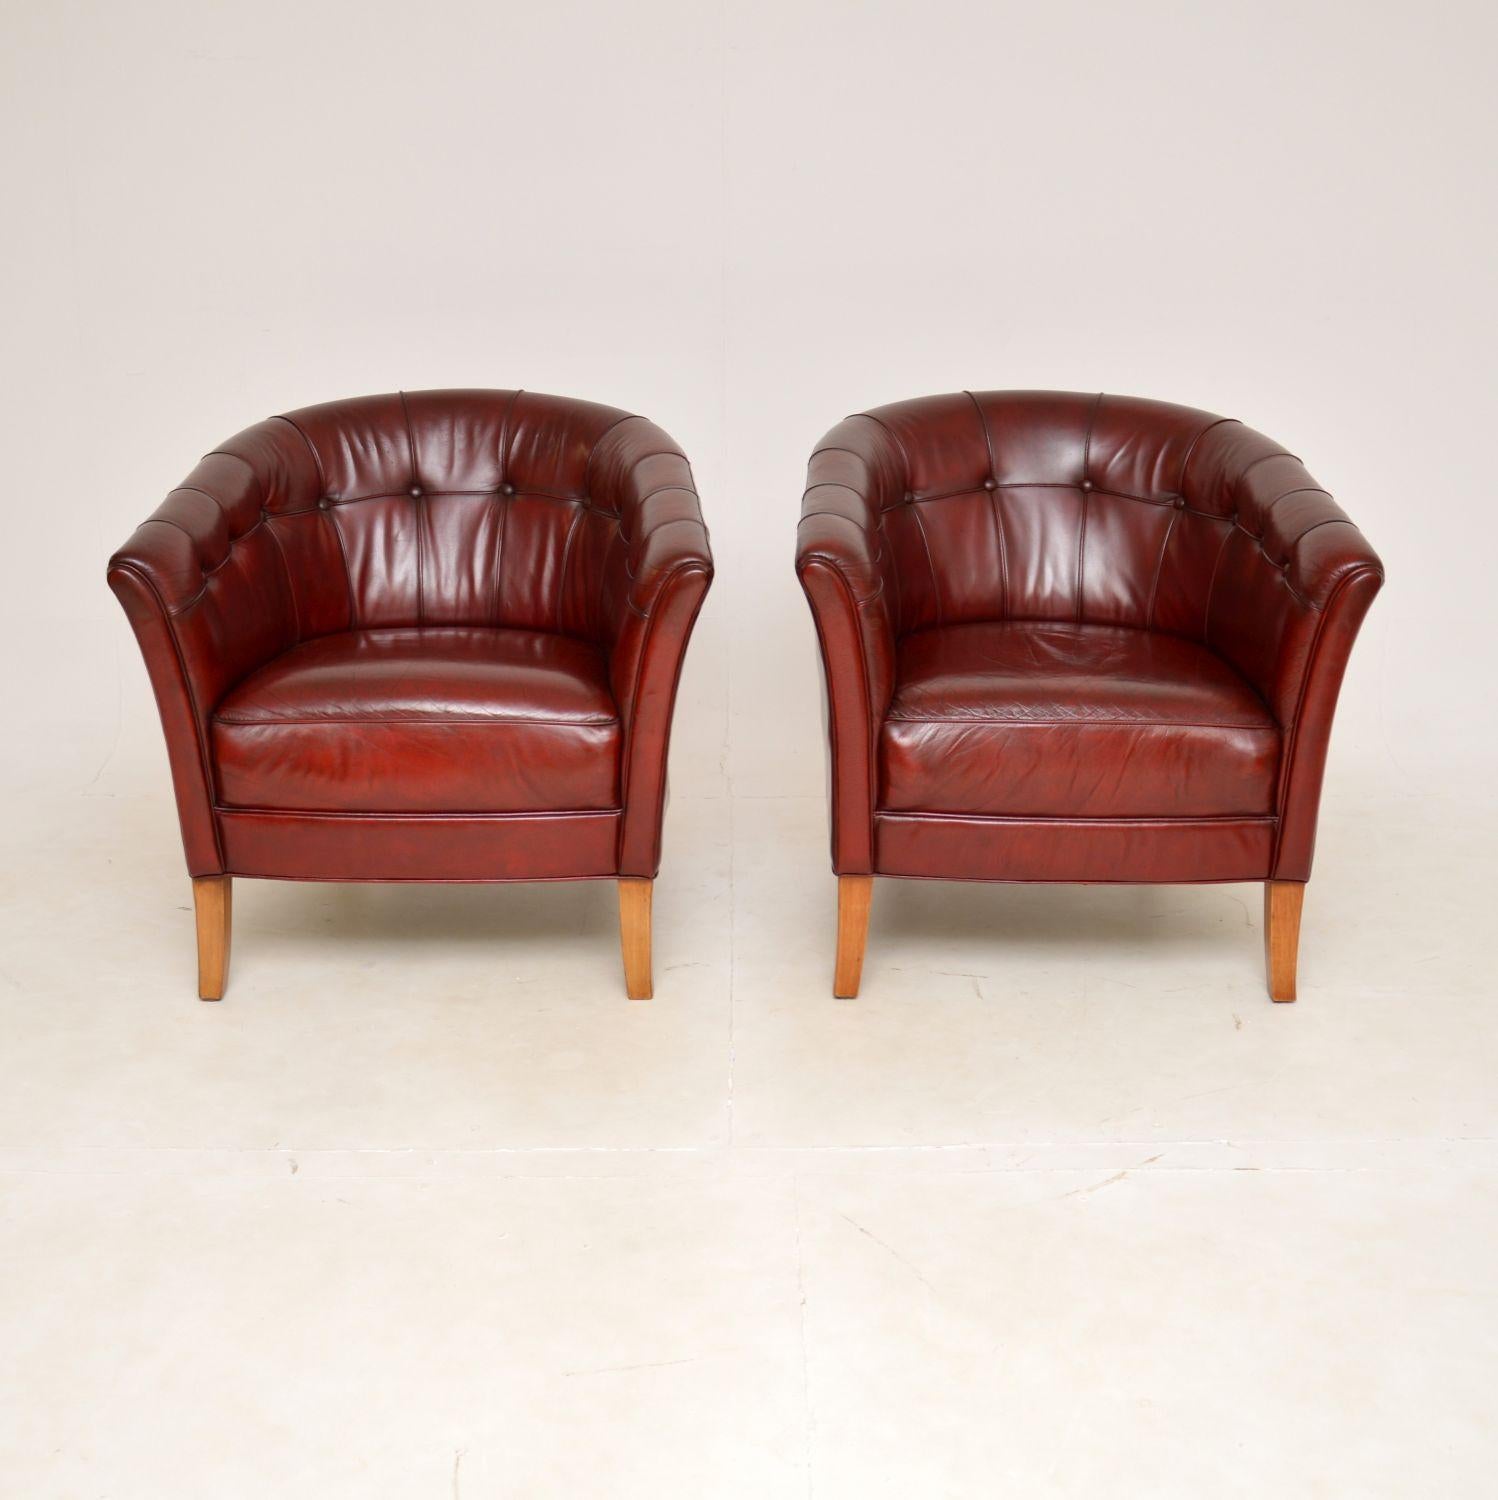 A superb pair of vintage Swedish leather club chairs. They were recently imported from Sweden, they date from around the 1950’s.

The quality is outstanding, they are very well made are extremely comfortable. The original buttoned leather has a